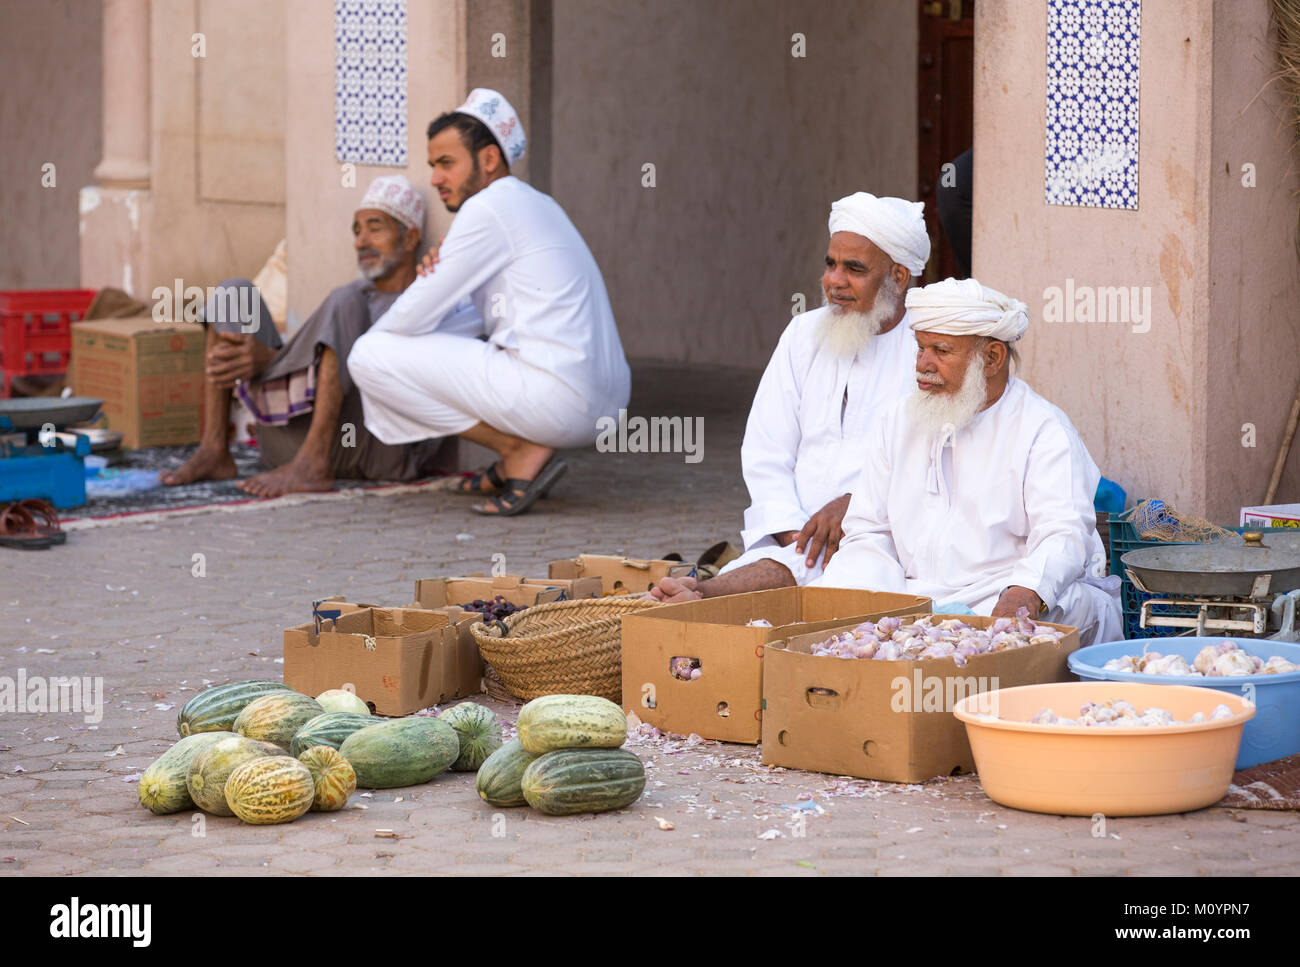 Nizwa, Oman - June 24th, 2017: omani men selling their produce at a streetmarket in old town Stock Photo